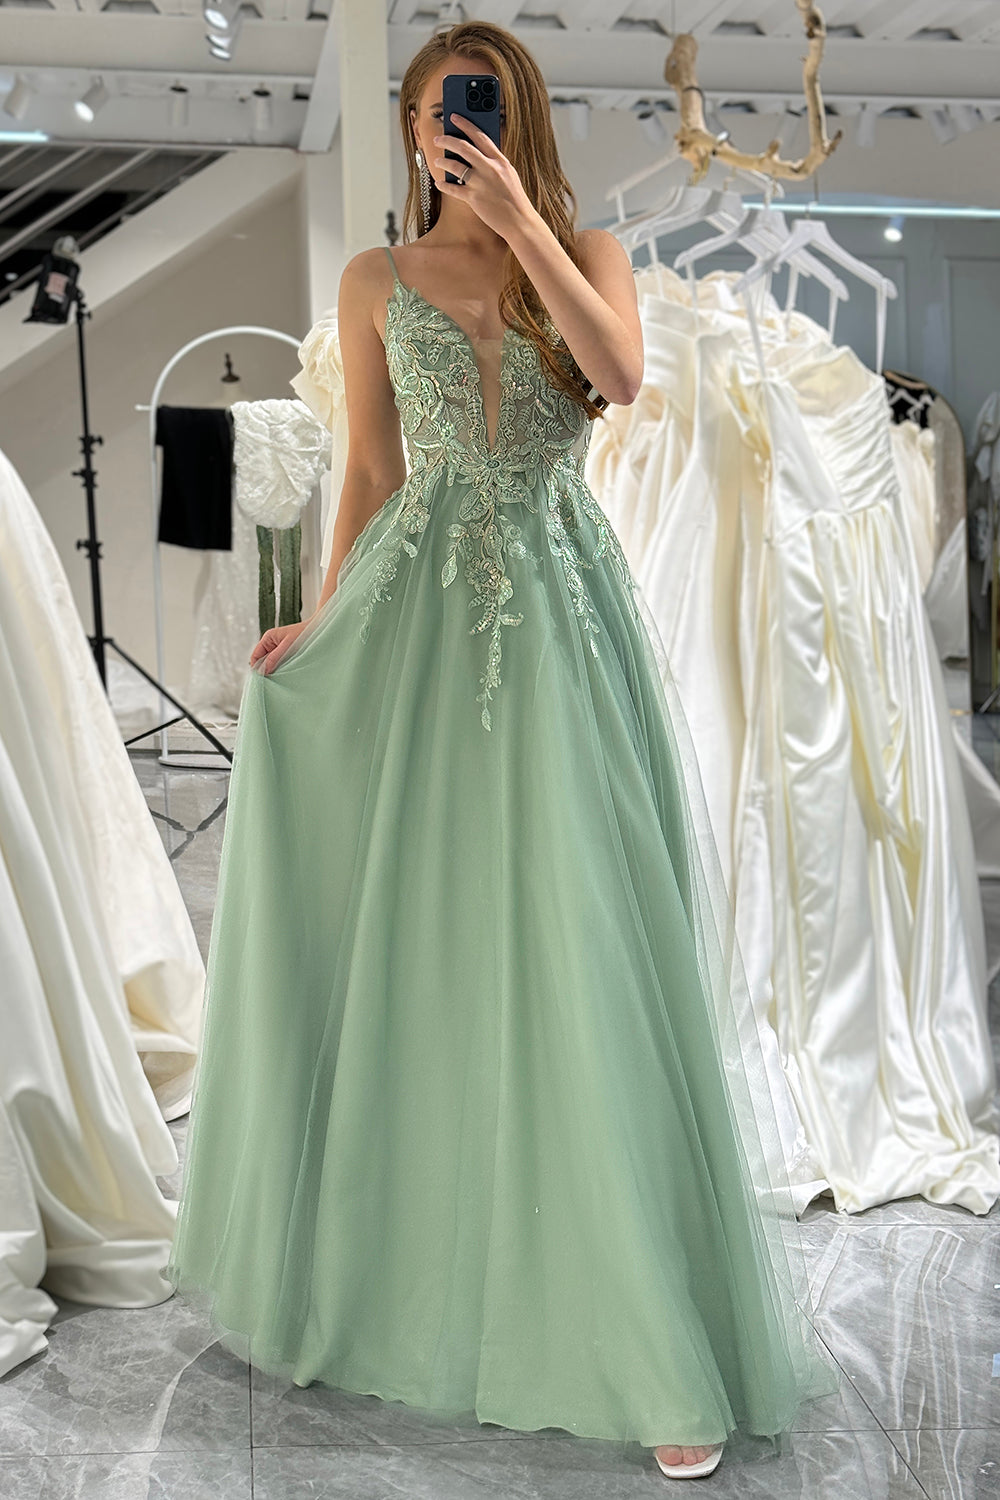 Green A-Line Tulle Backless Long Prom Dress With Glitter Appliques